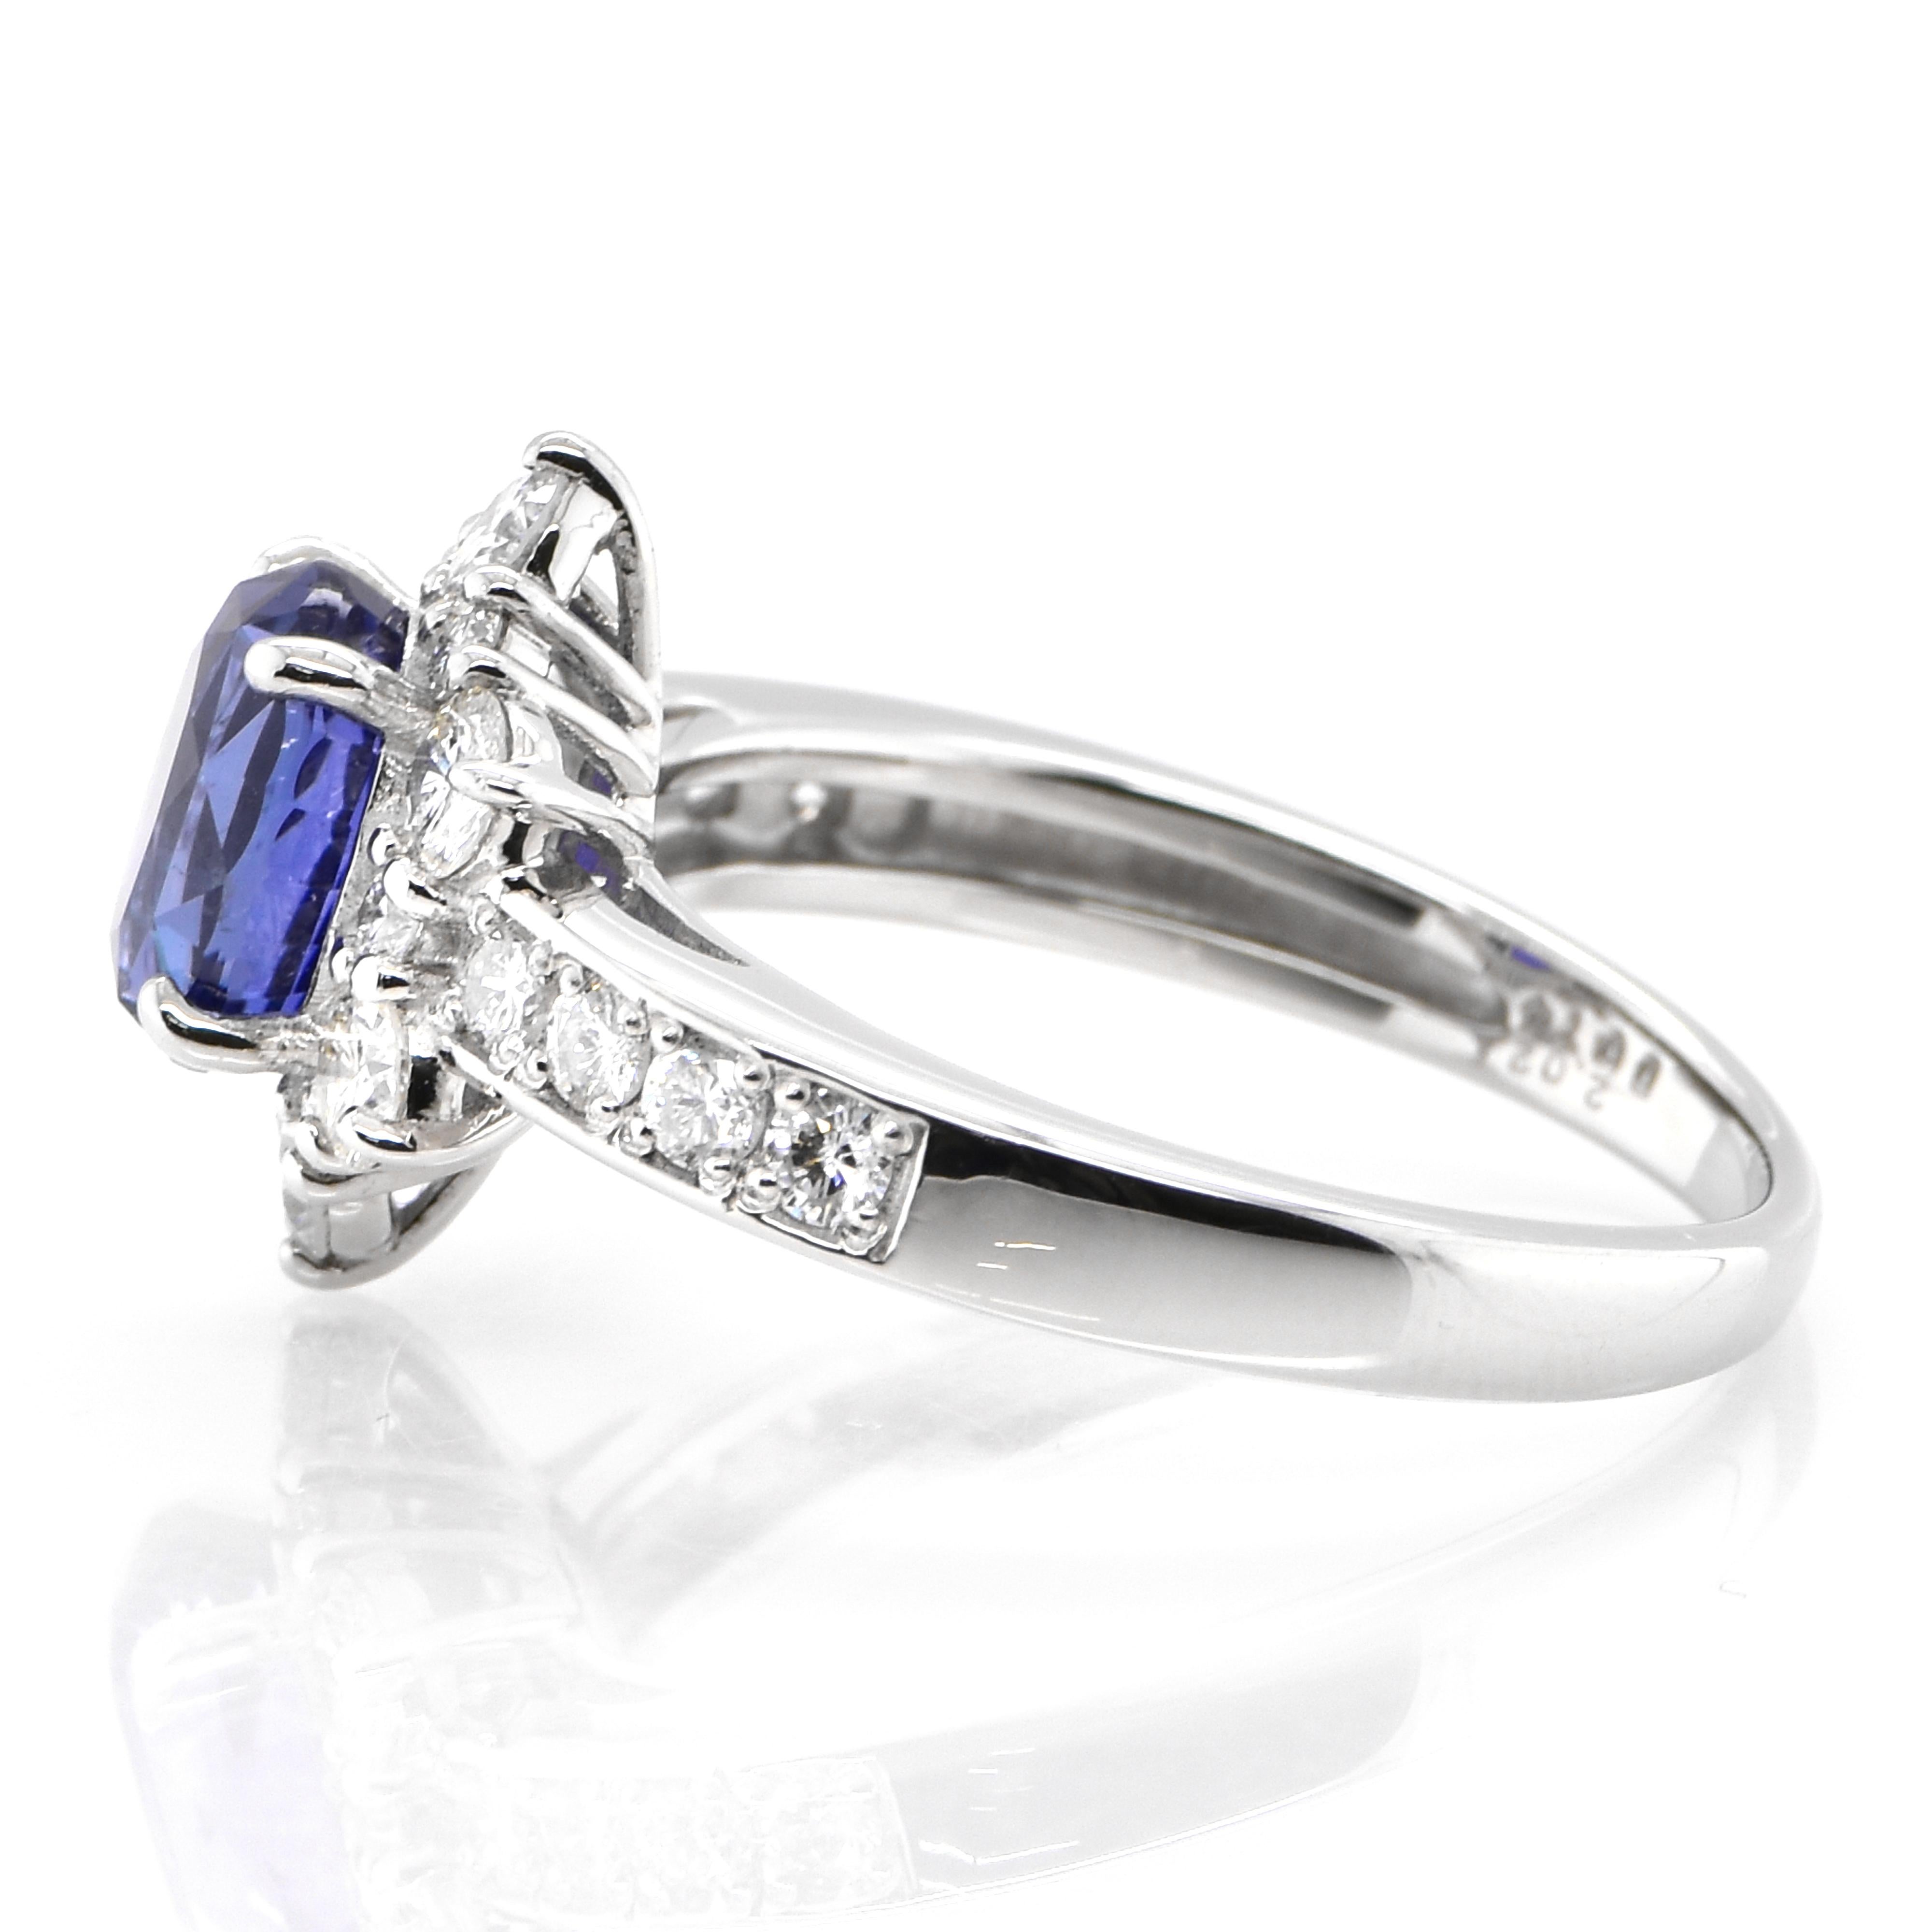 Modern GIA Certified 2.02 Carat, Color-Change Sapphire and Diamond Ring set in Platinum For Sale